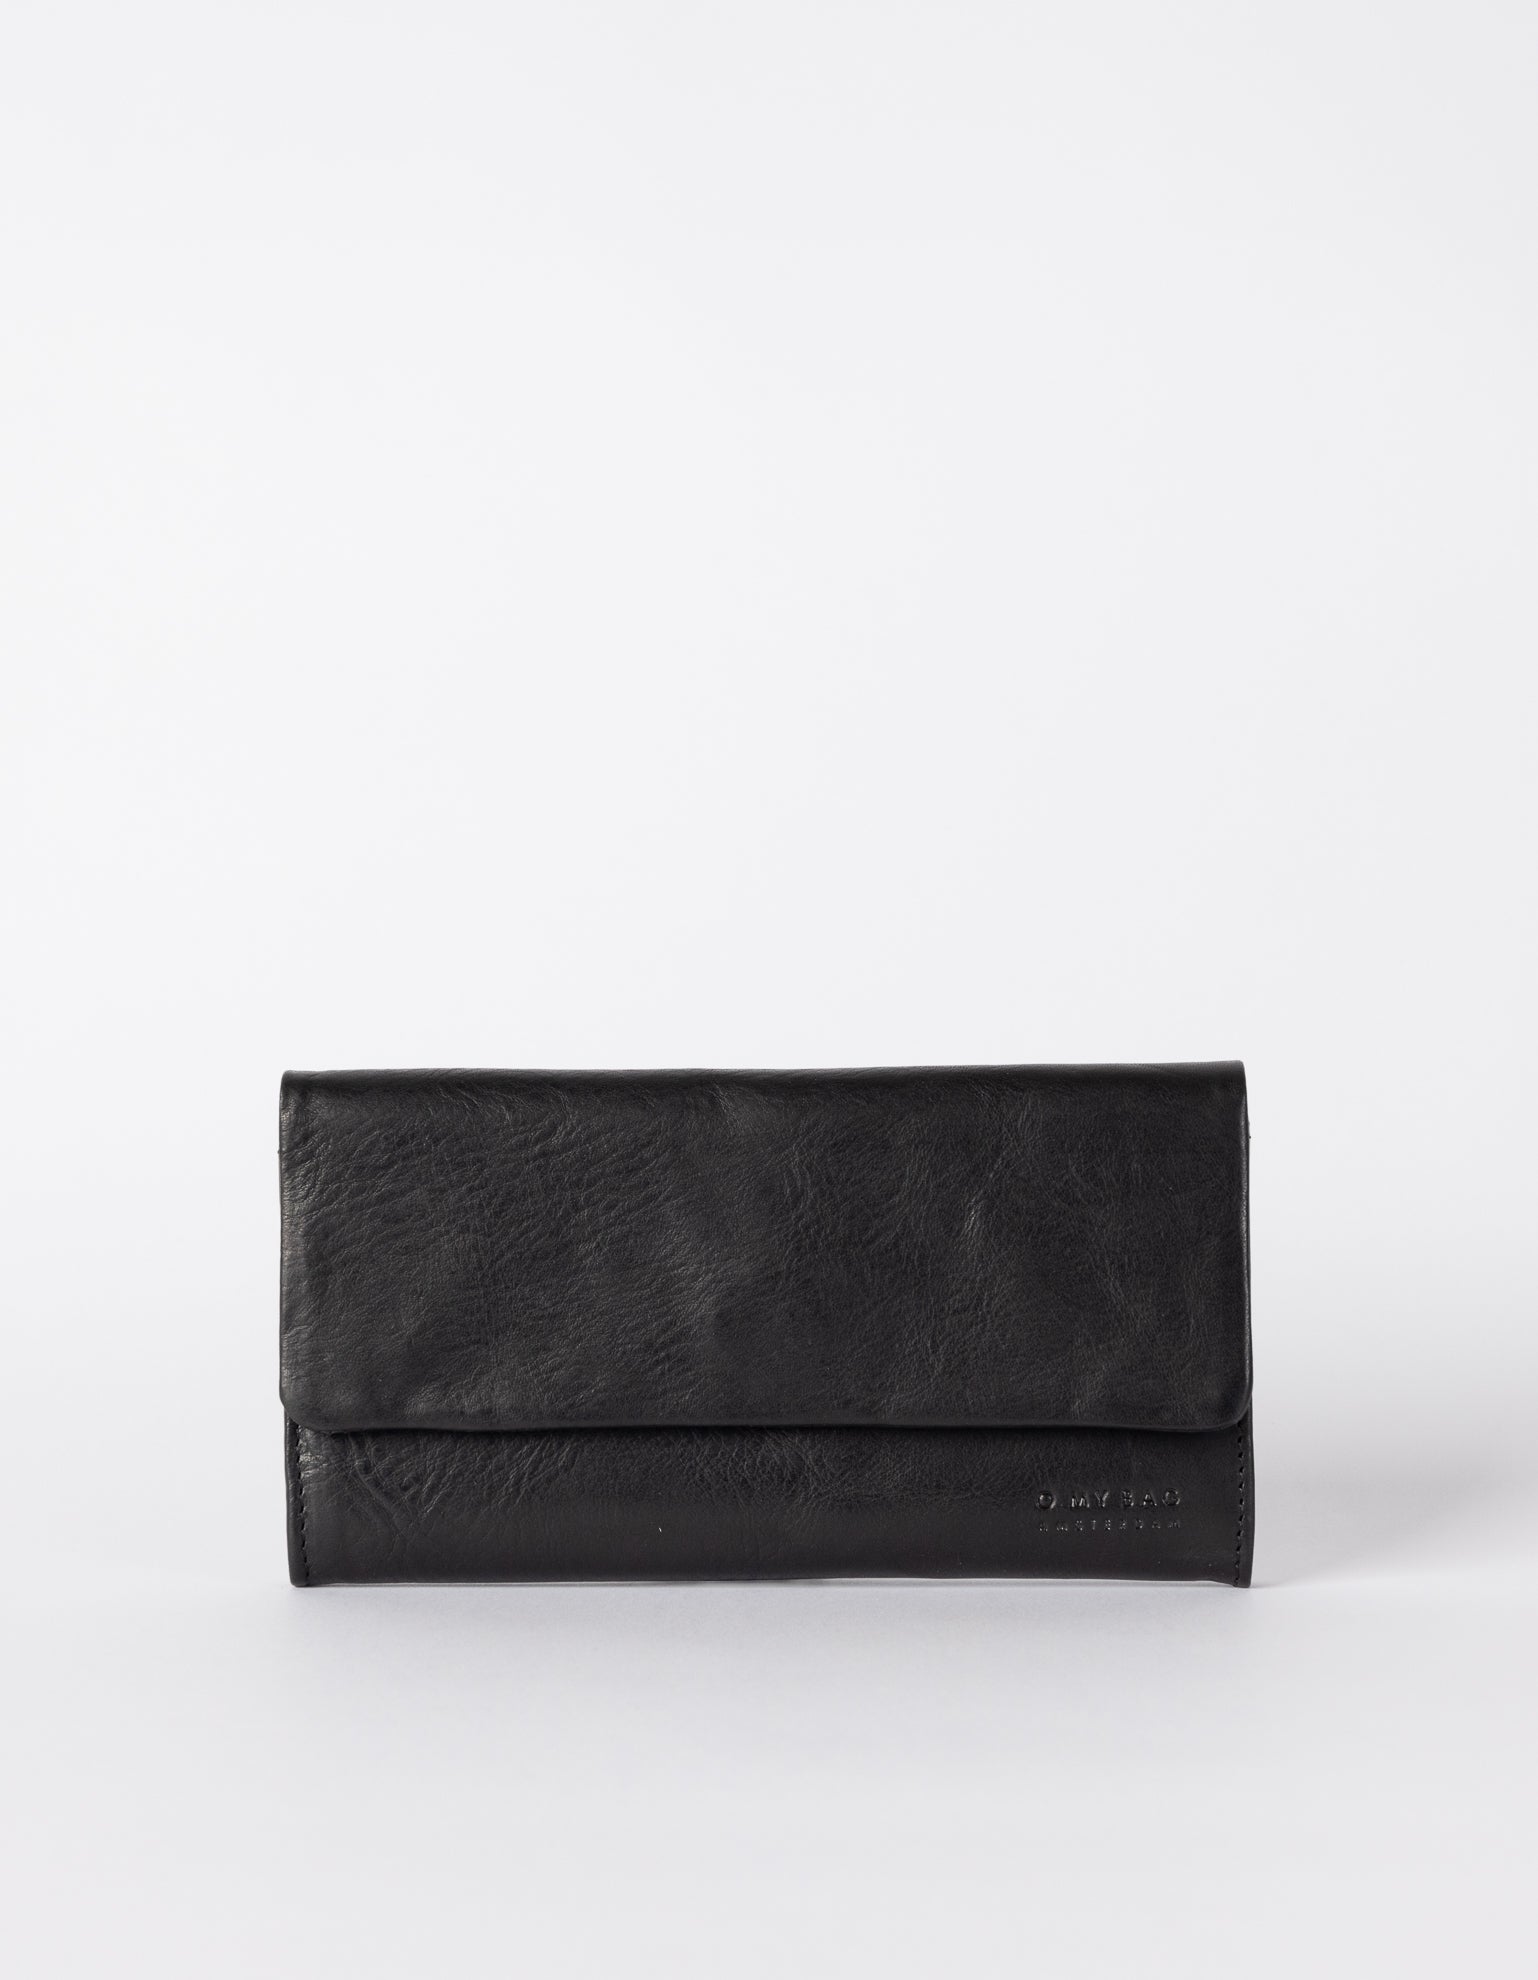 Pau Pouch Black Leather women’s purse. Rectangular shaped fold over wallet. Front model image